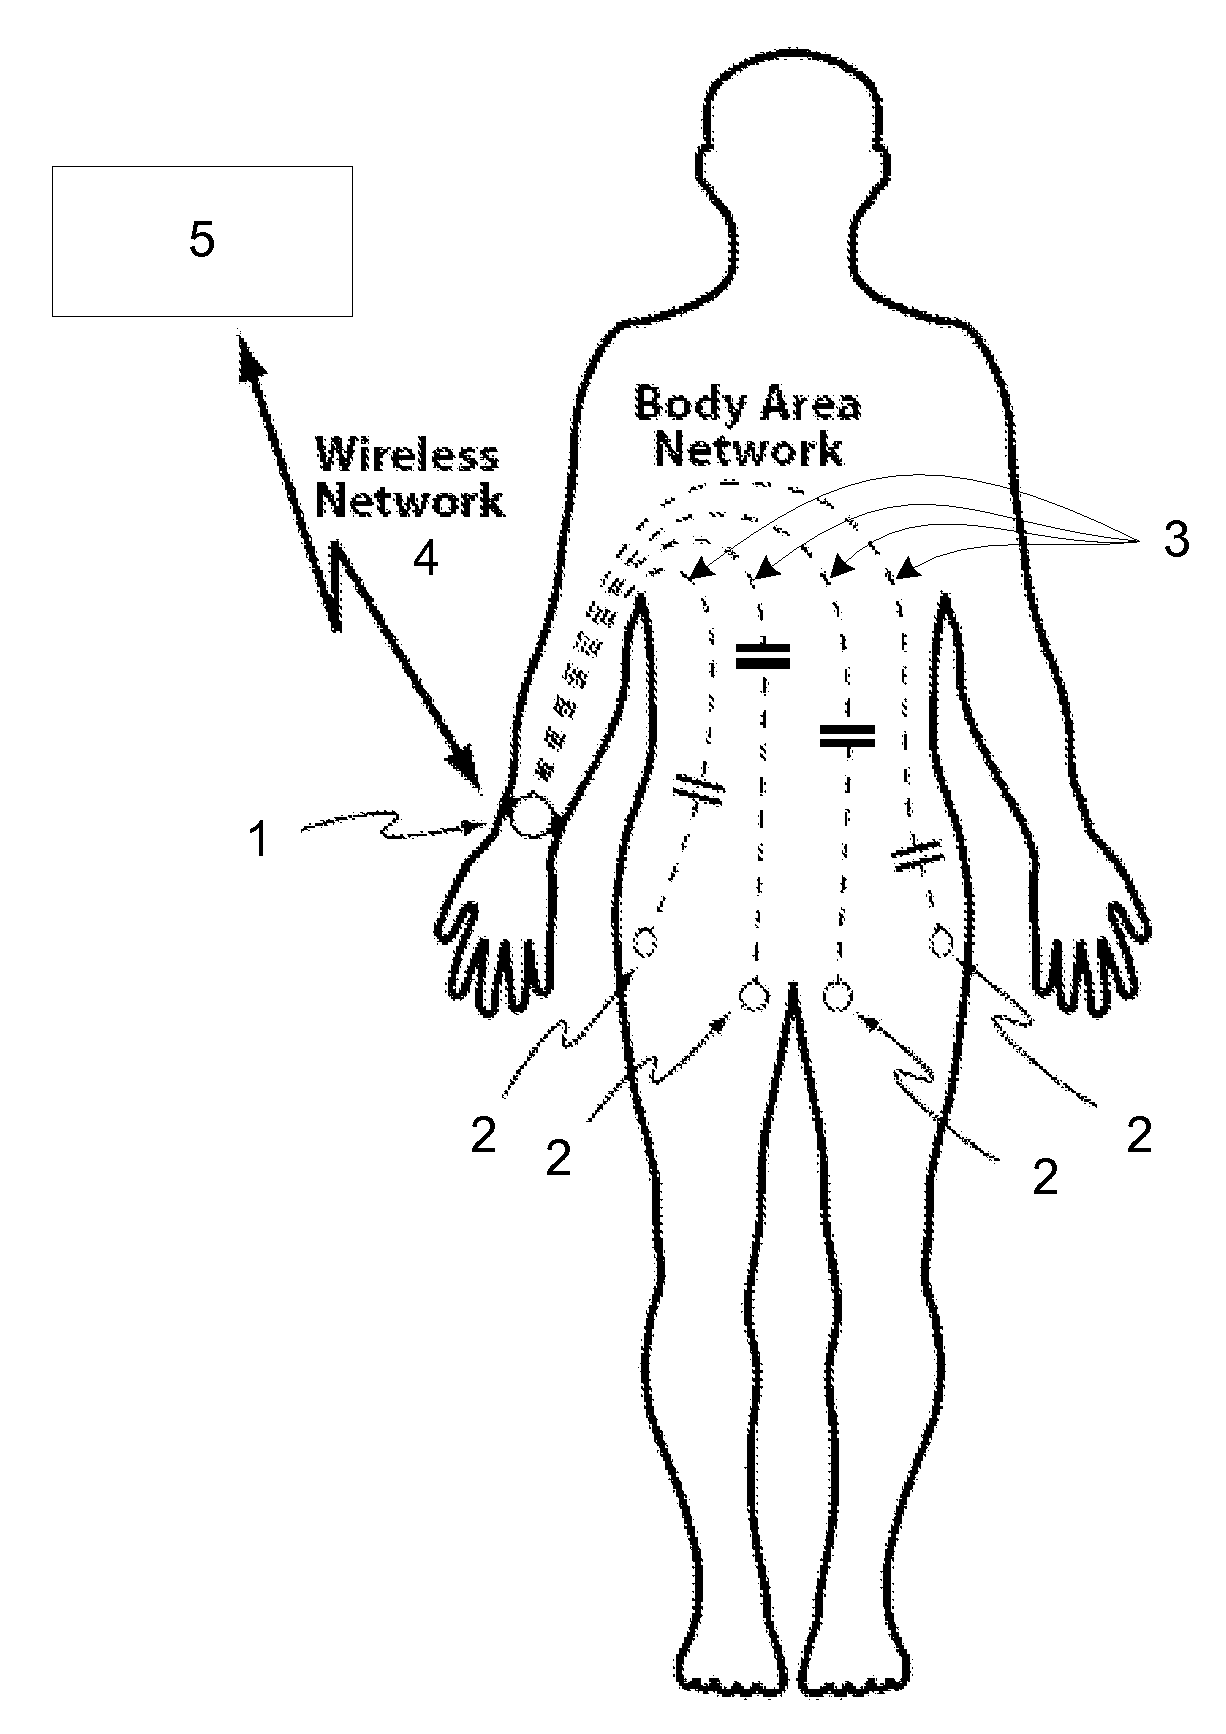 Wireless sensor system for monitoring skin condition using the body as communication conduit